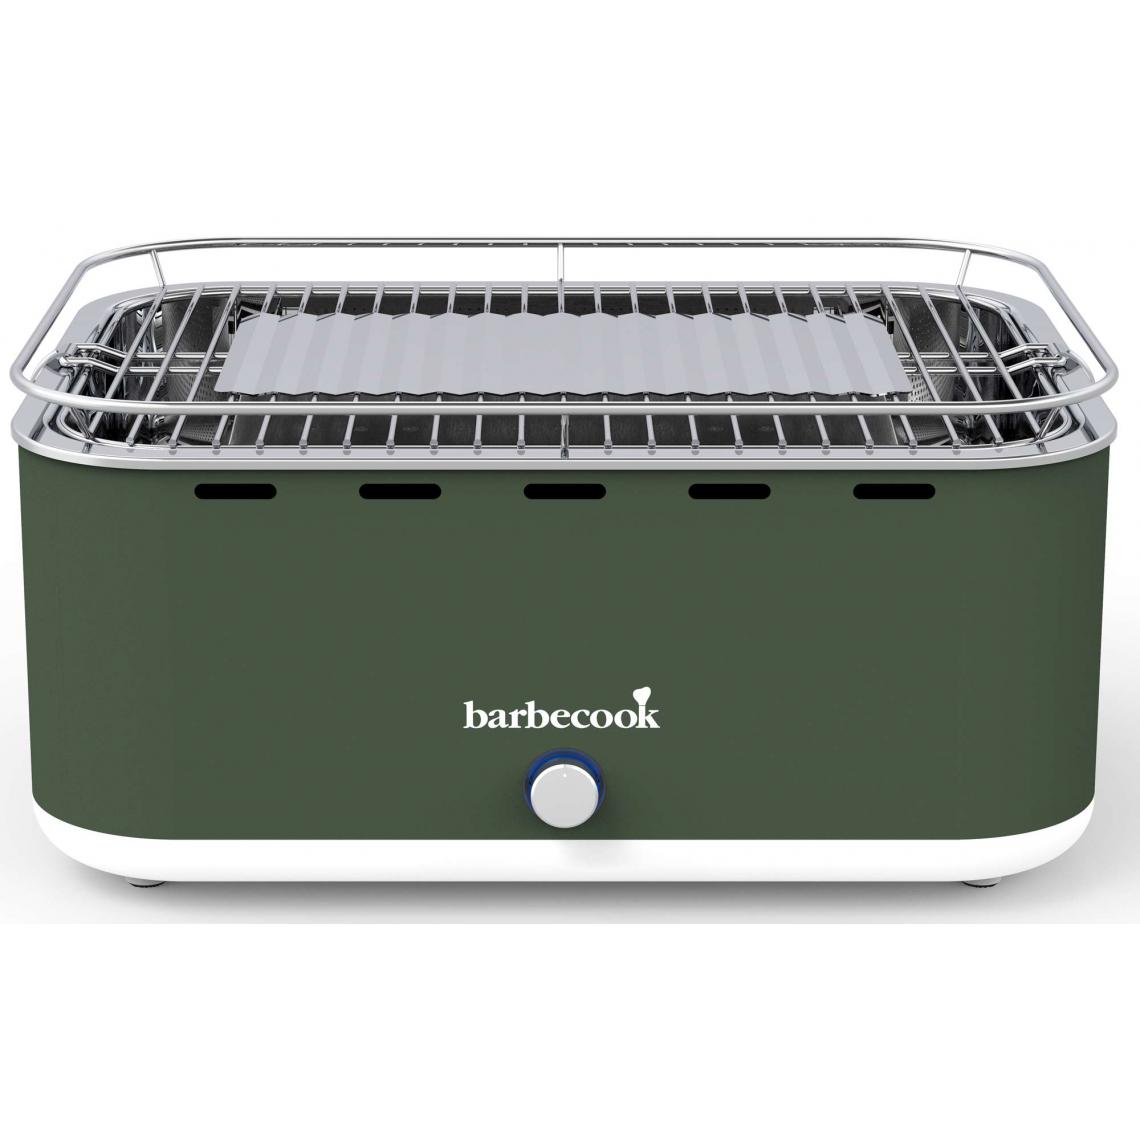 BARBECOOK - Barbecue BARBECOOK CARLOARMYGREEN - Barbecues électriques